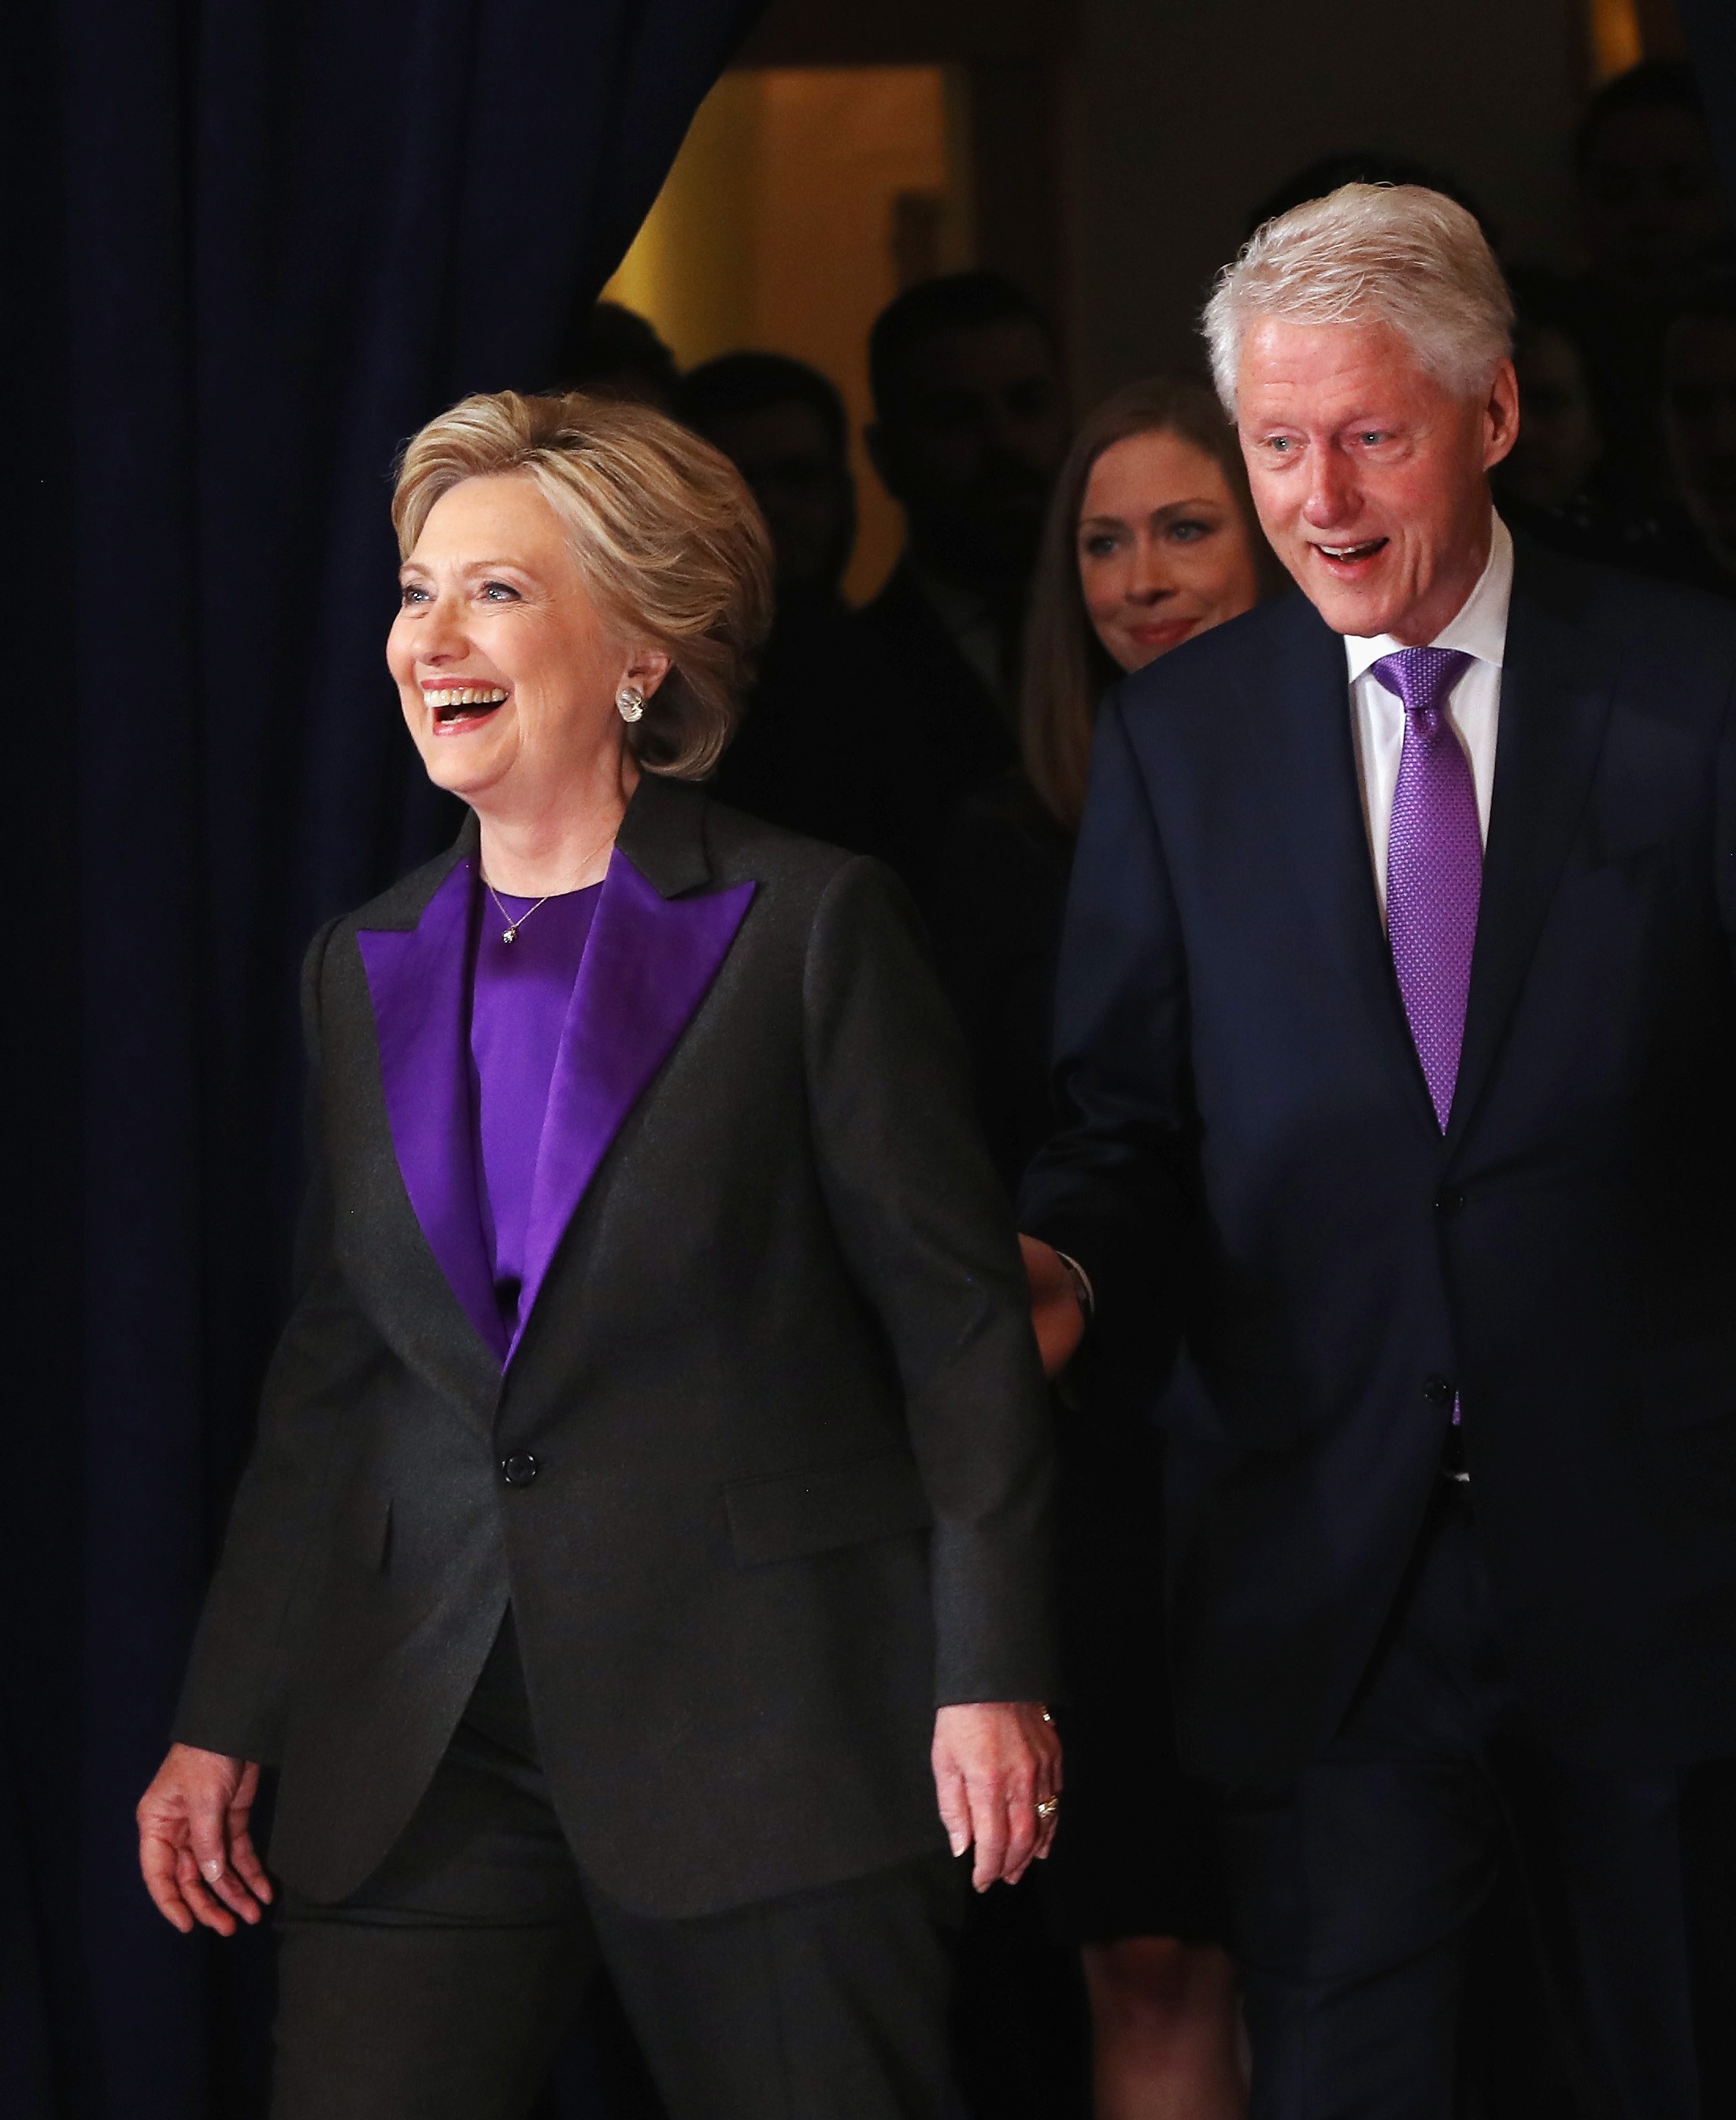 NEW YORK, NY - NOVEMBER 09:  Former Secretary of State Hillary Clinton, accompanied by her husband former President Bill Clinton, takes the stage to concede the presidential election at the New Yorker Hotel on November 9, 2016 in New York City. Republican (Foto: Getty Images)